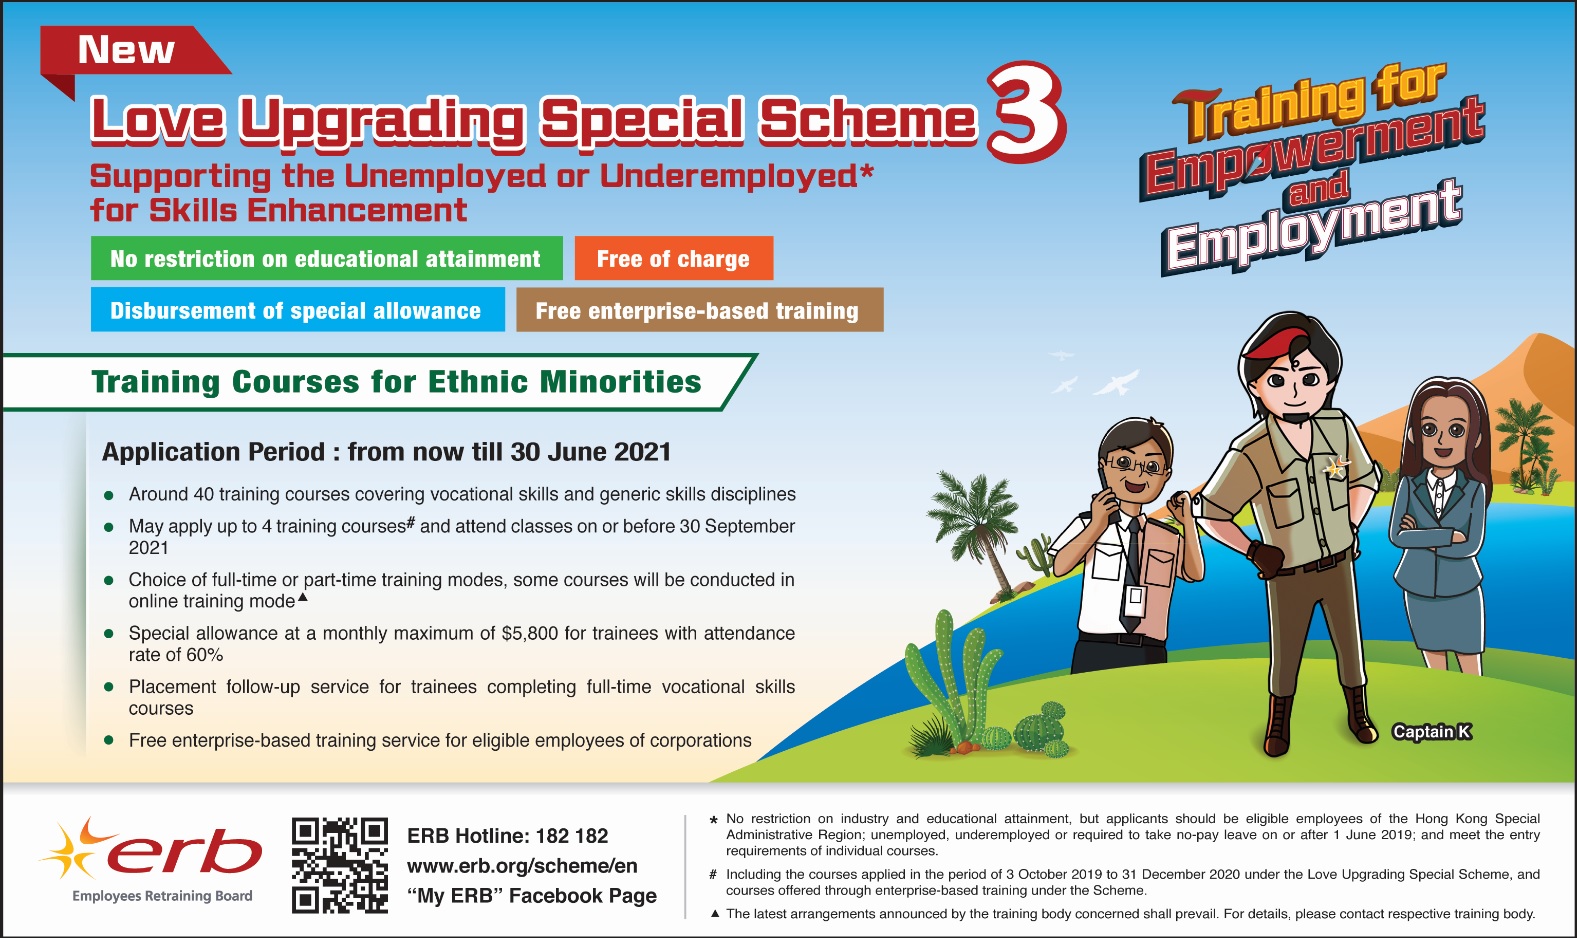 Click here to download the image version of newspaper advertisement of Love Upgrading Special Scheme 3 (January 2021)